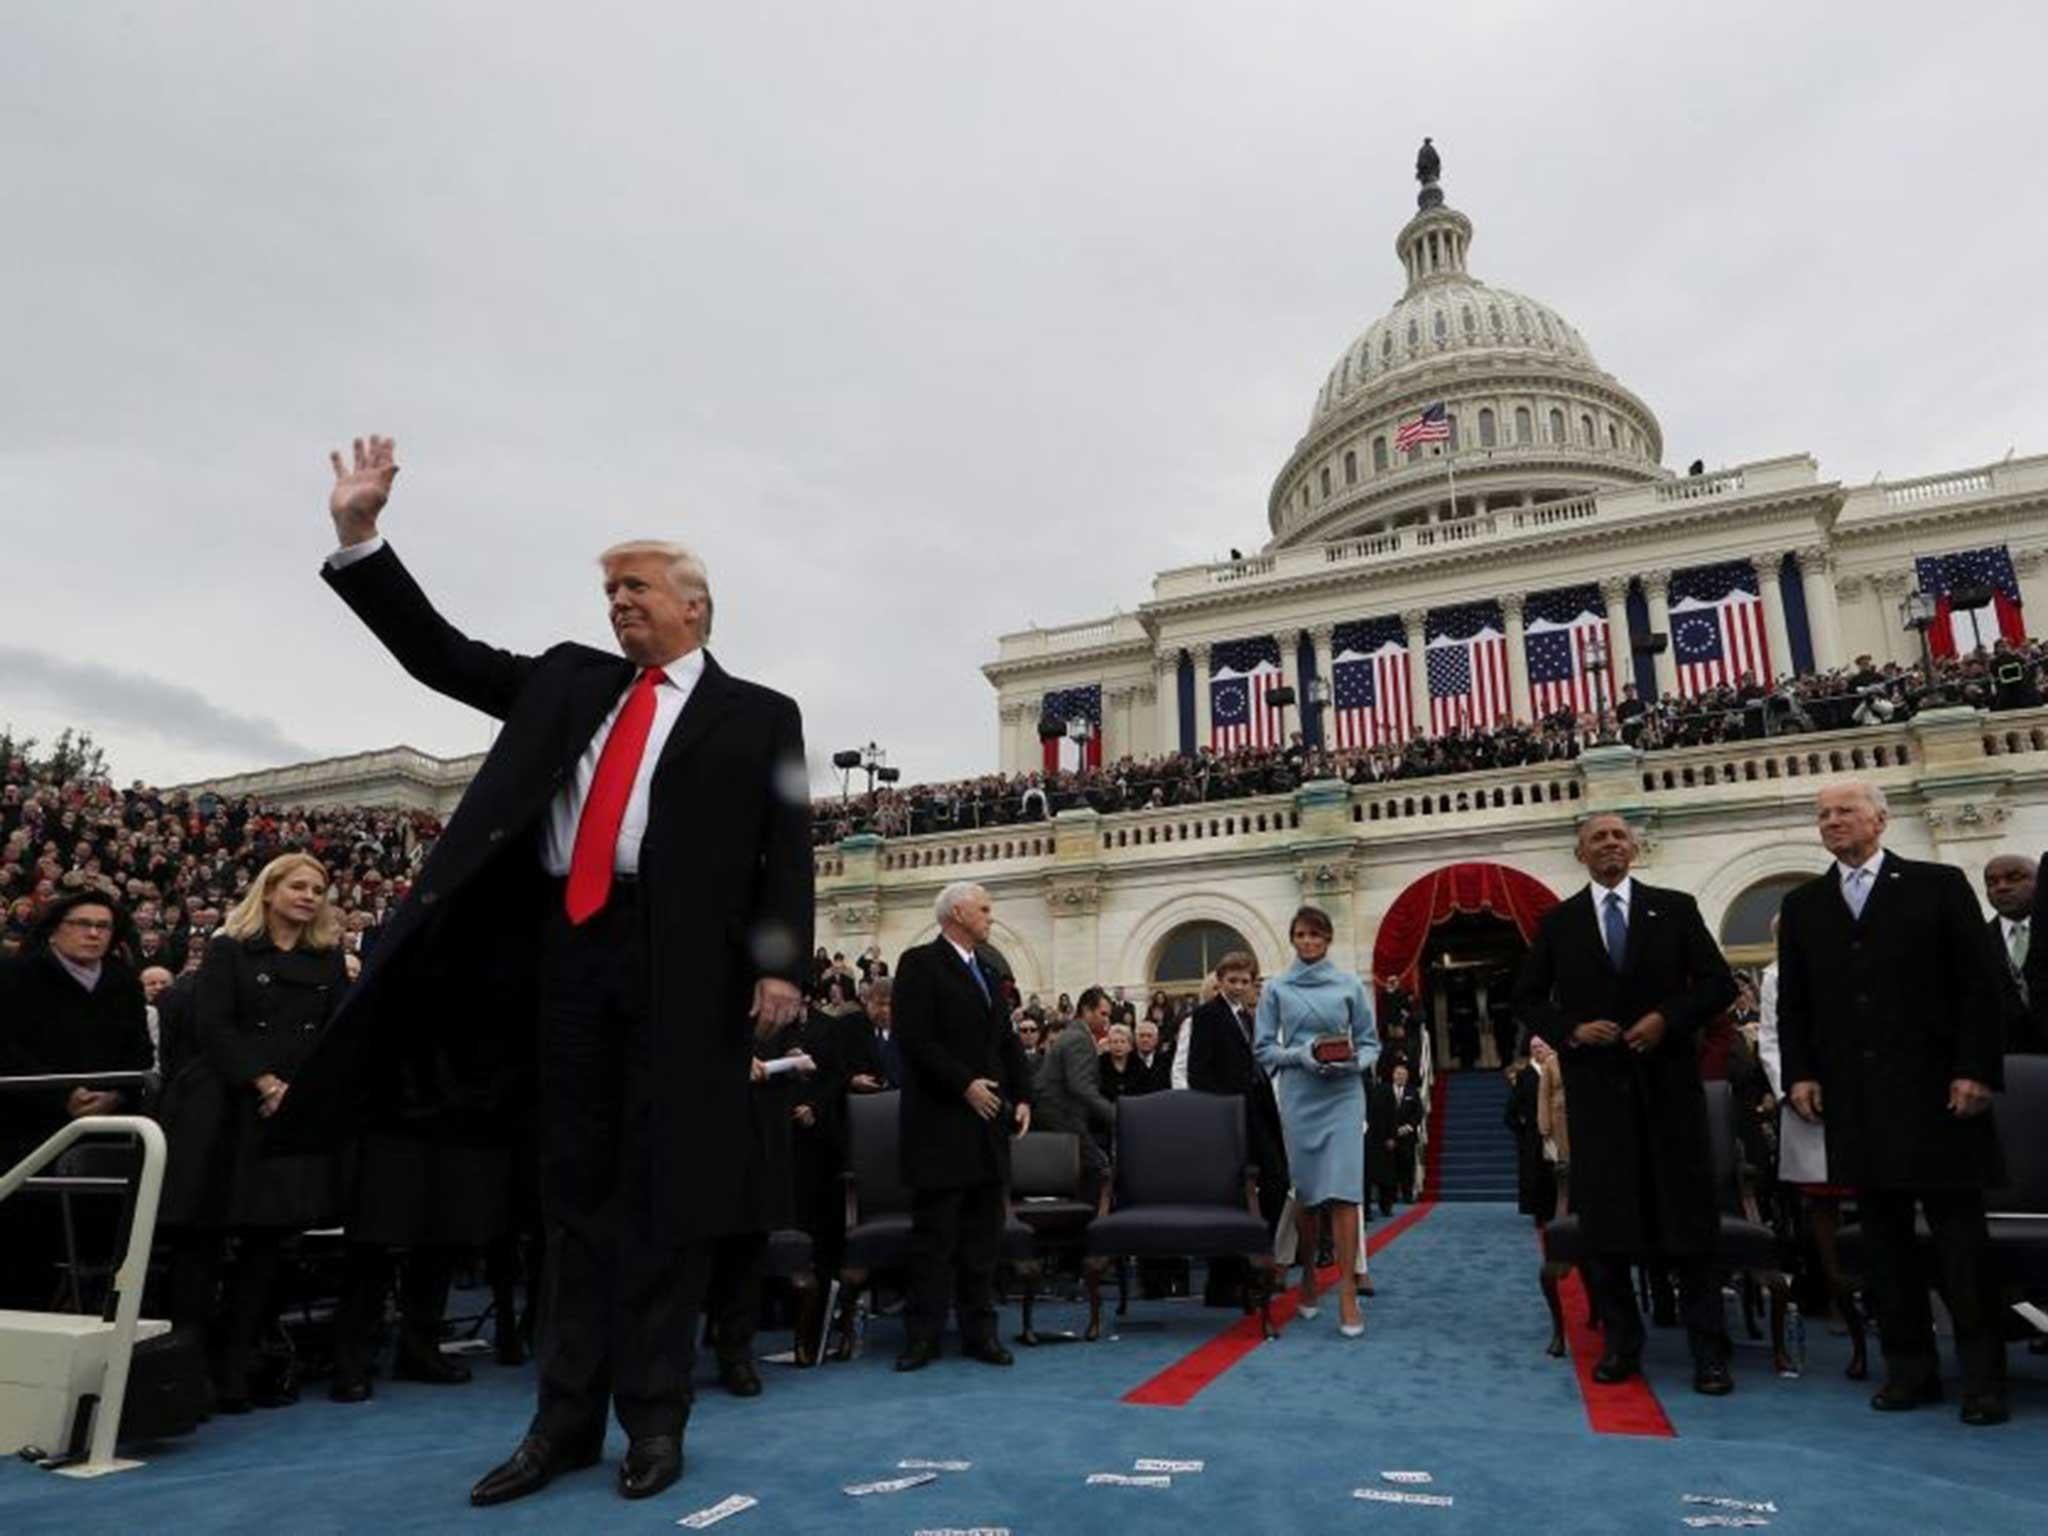 Donald Trump delivered a speech like any other, terse and blunt, and shorn of any of the soaring rhetoric of inaugurations past